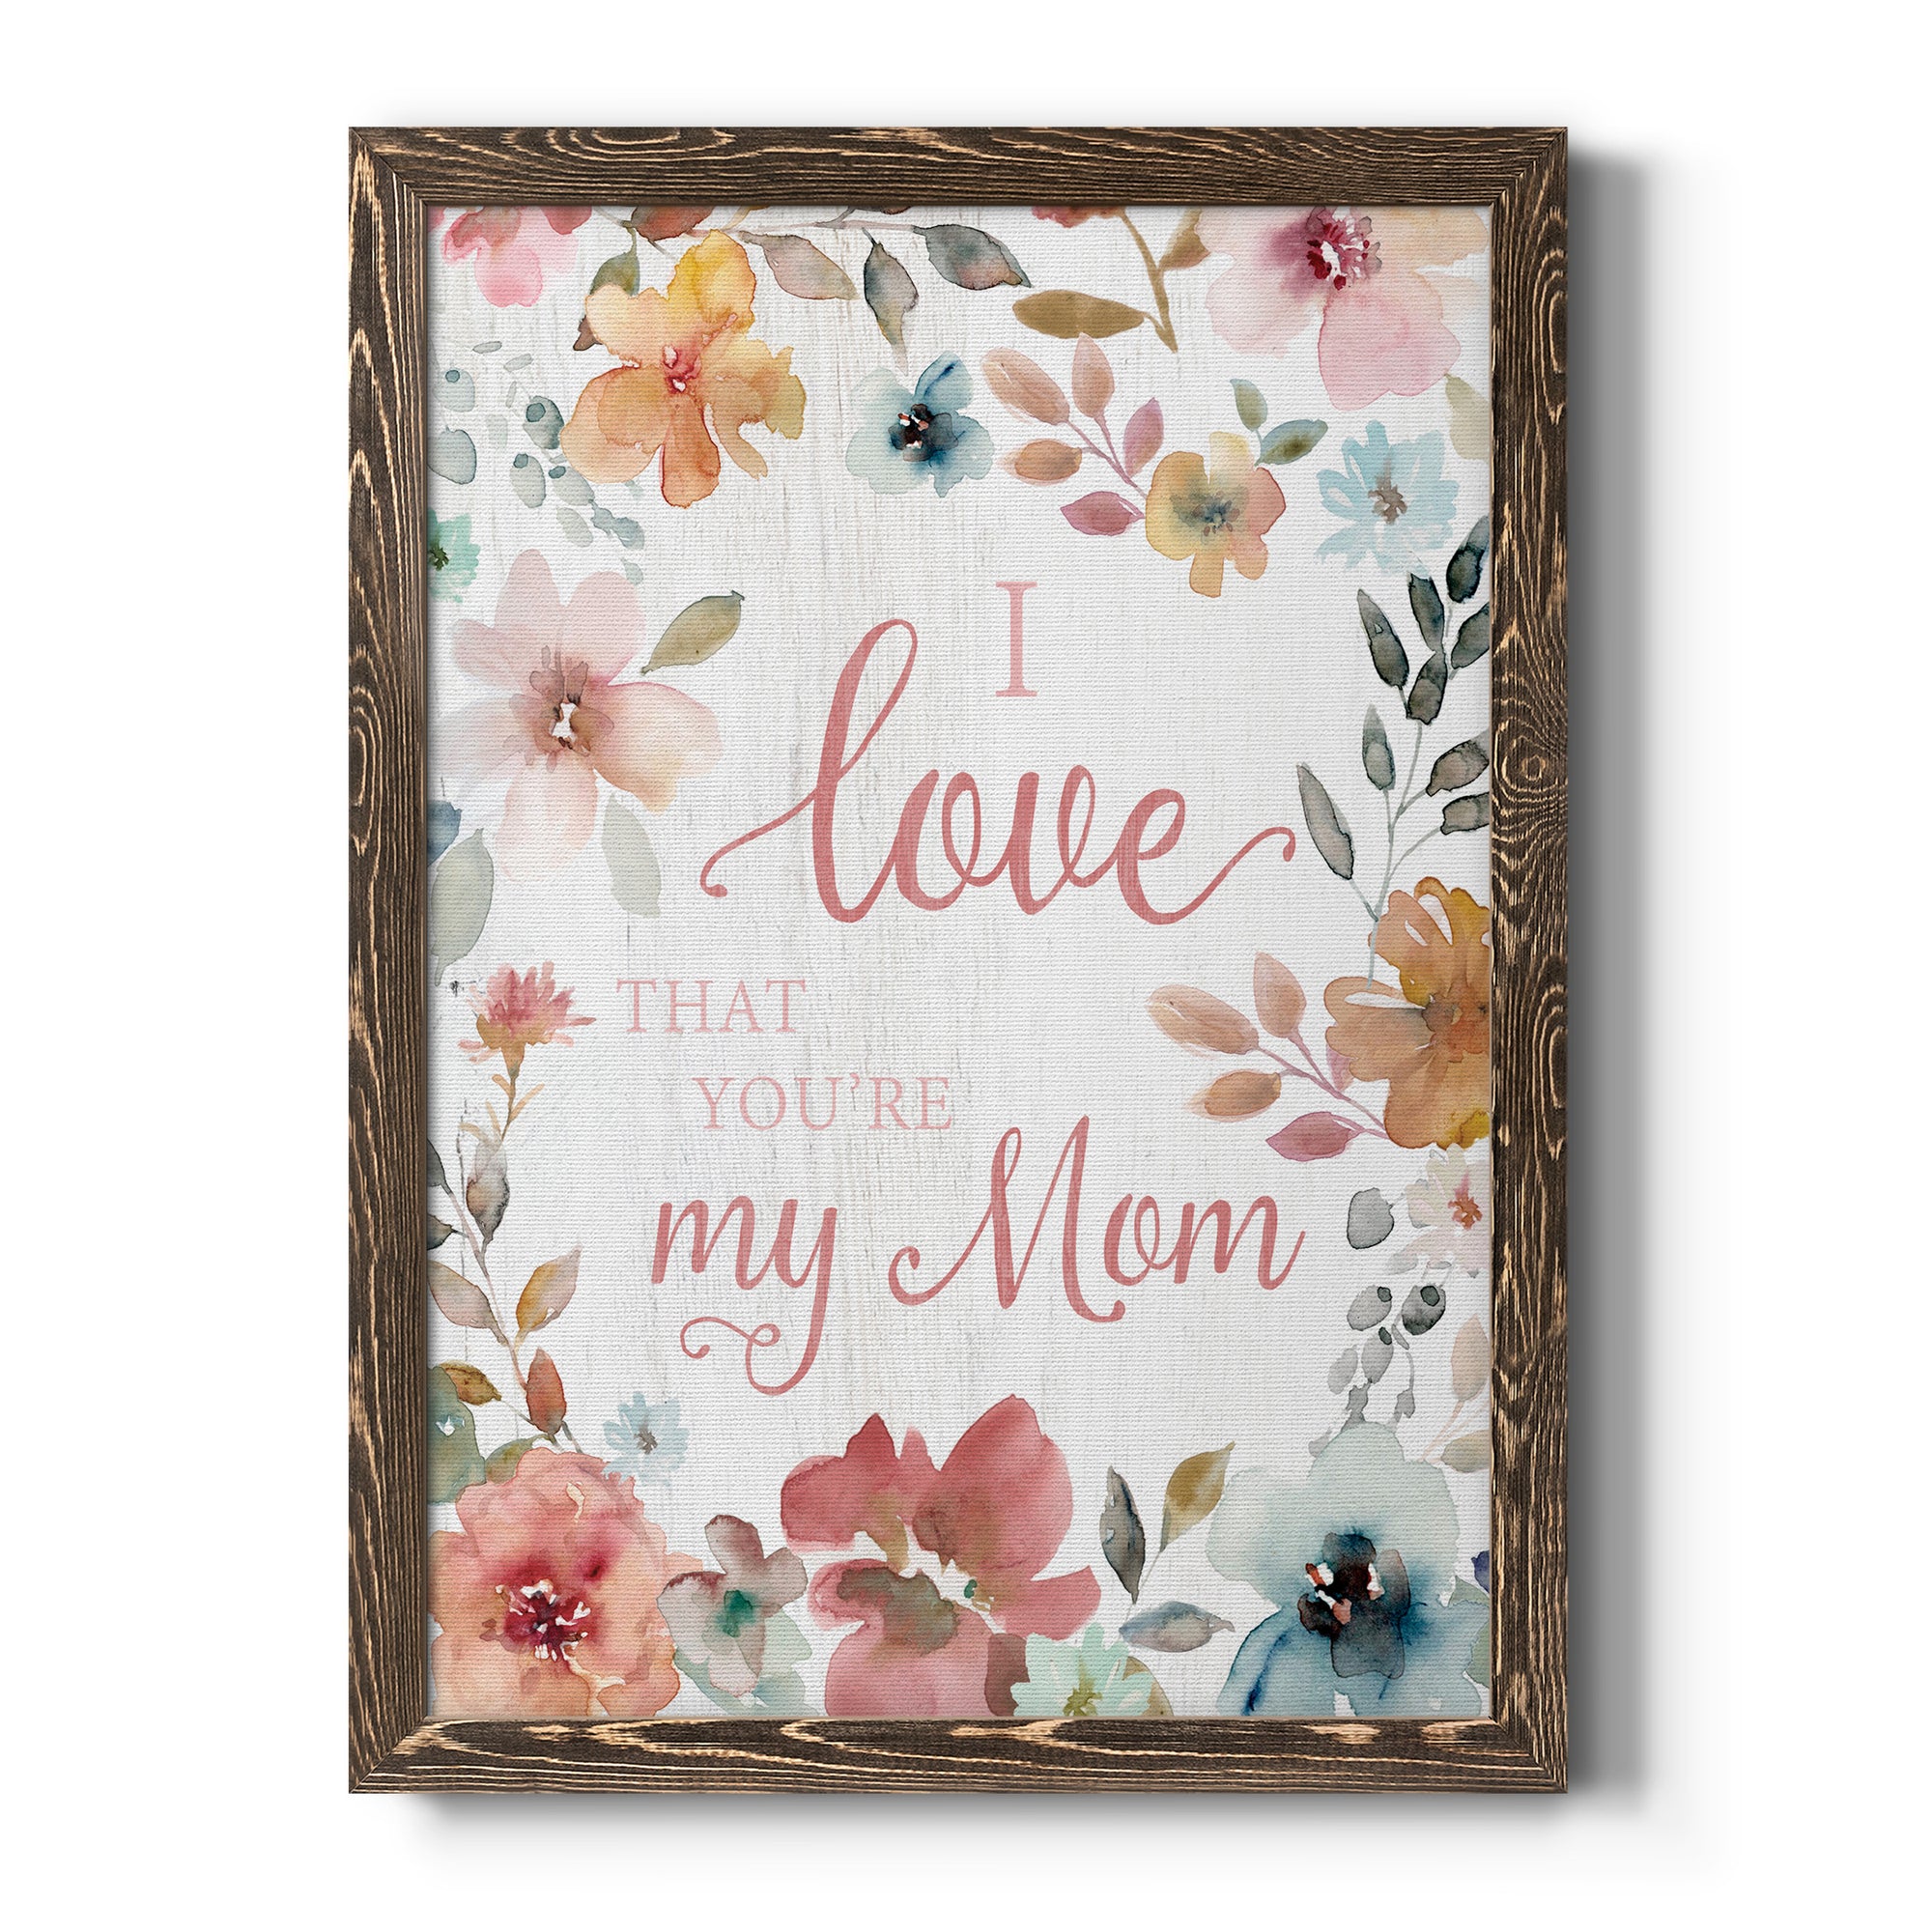 Love Mom - Premium Canvas Framed in Barnwood - Ready to Hang